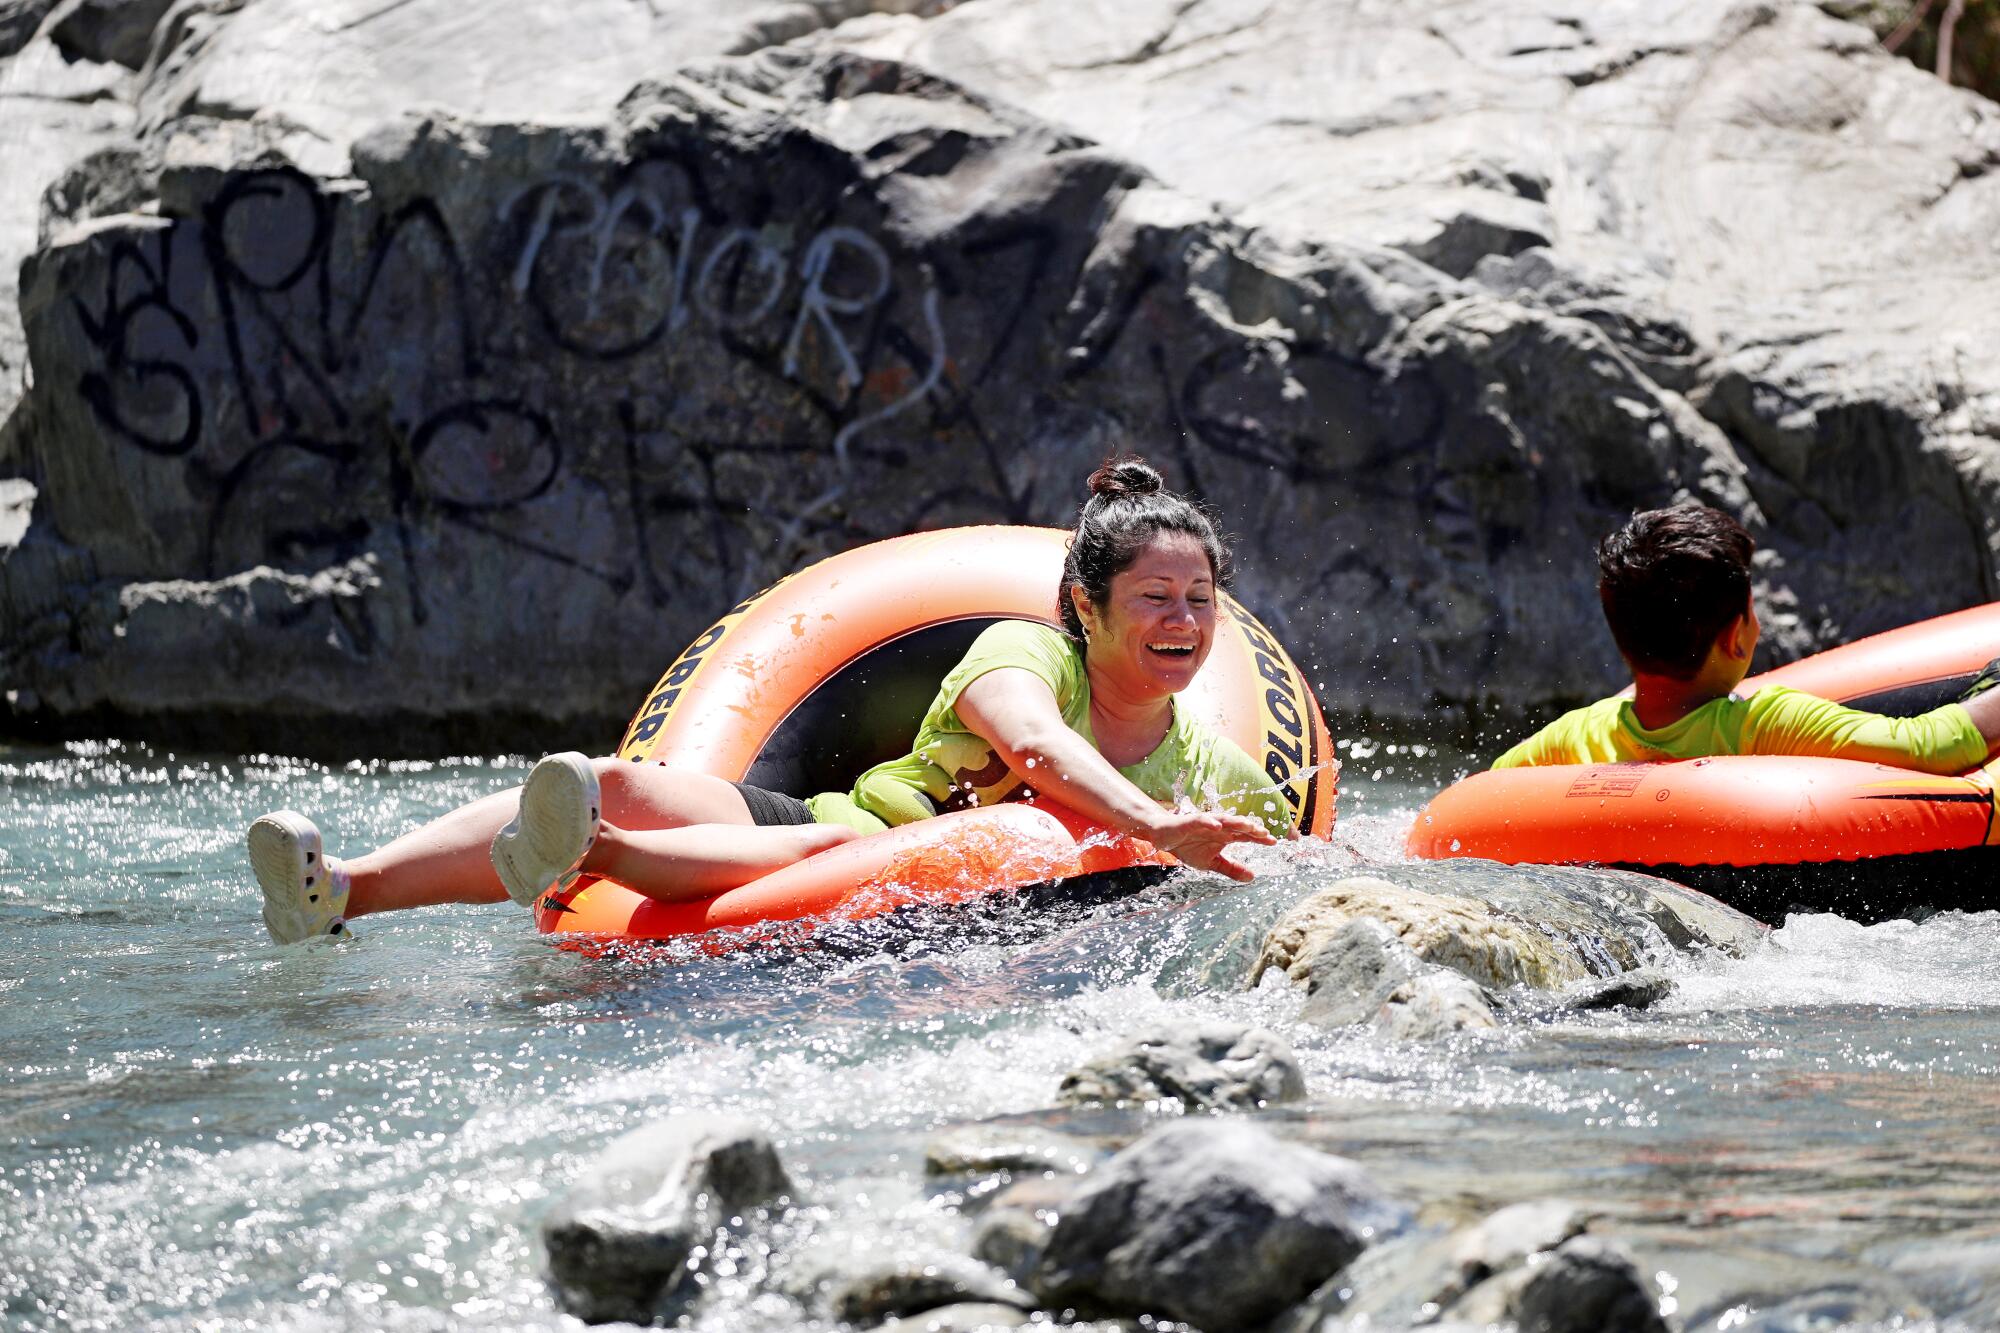 Two people float and play in bright orange innertubes in a river.